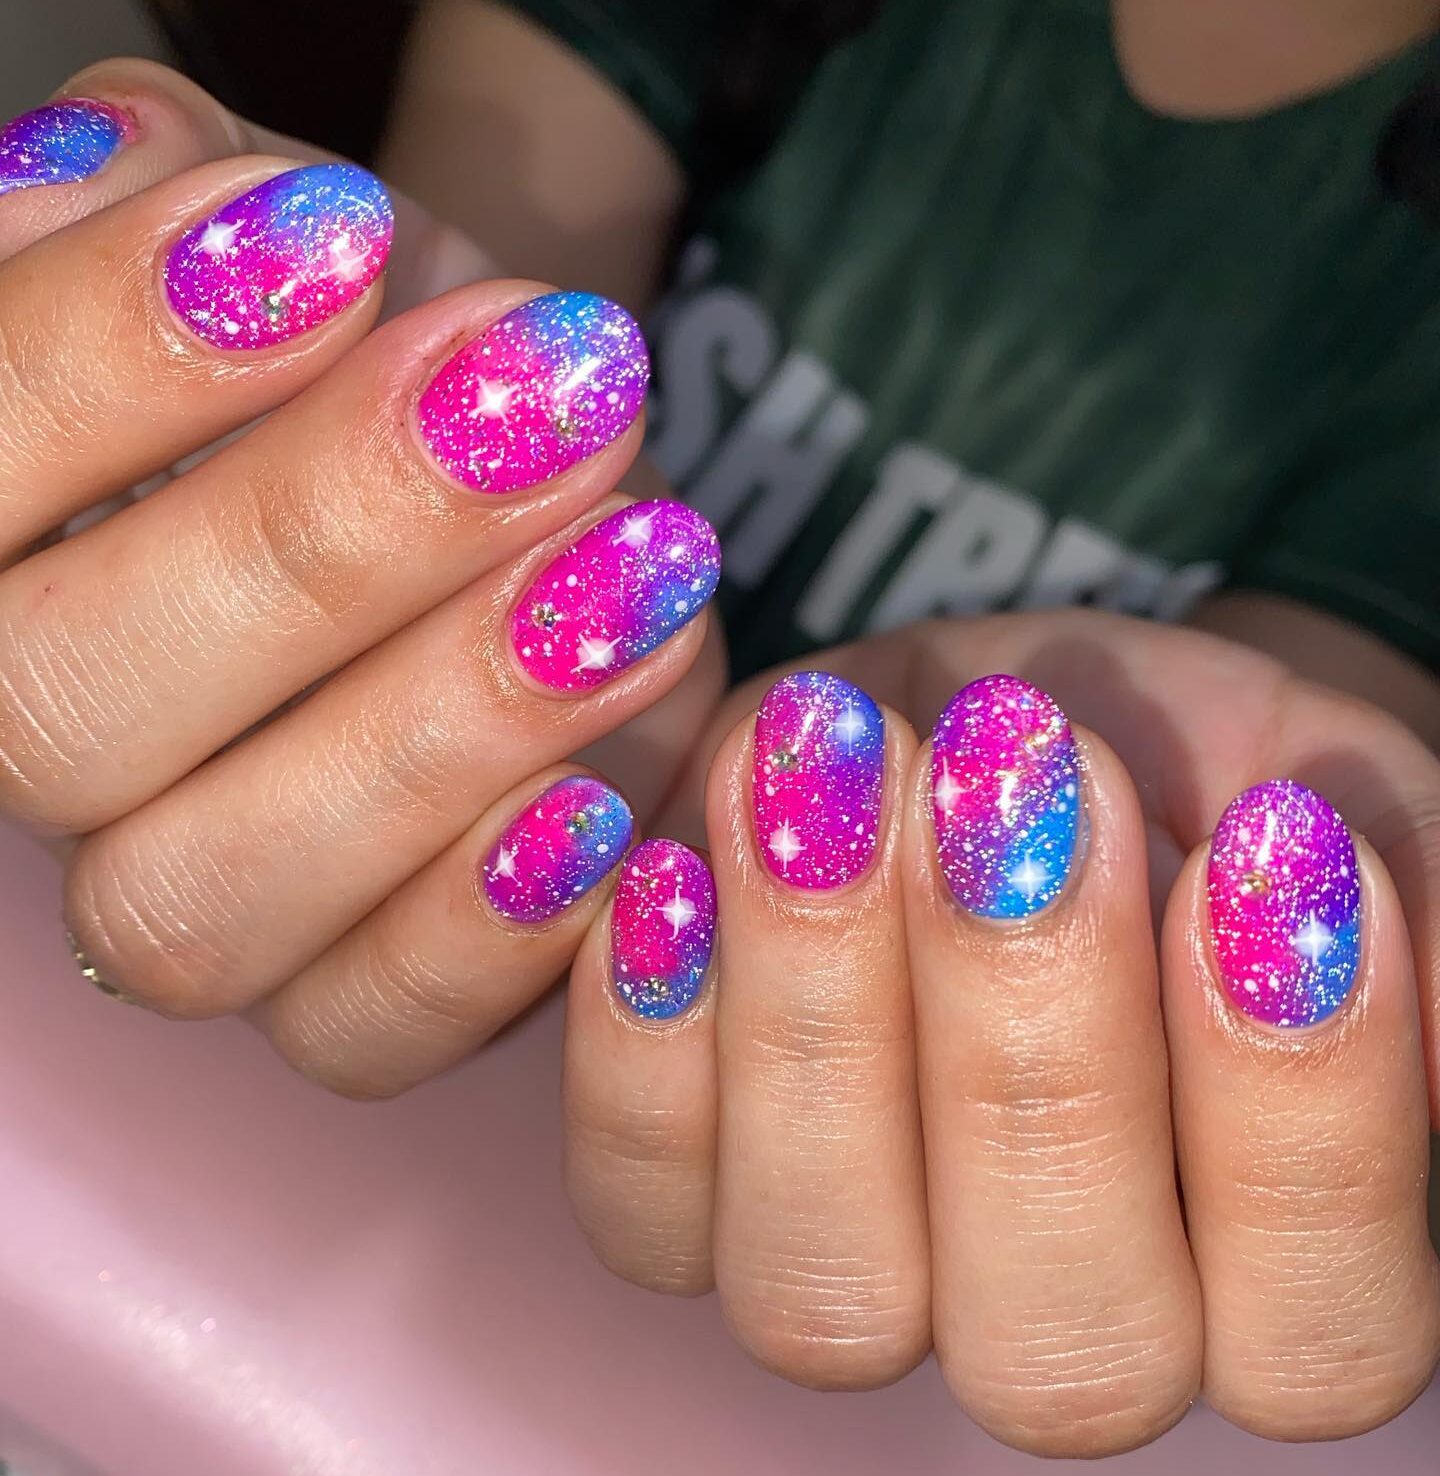 Vibrant pink and blue galaxy-themed nail design on short round nails